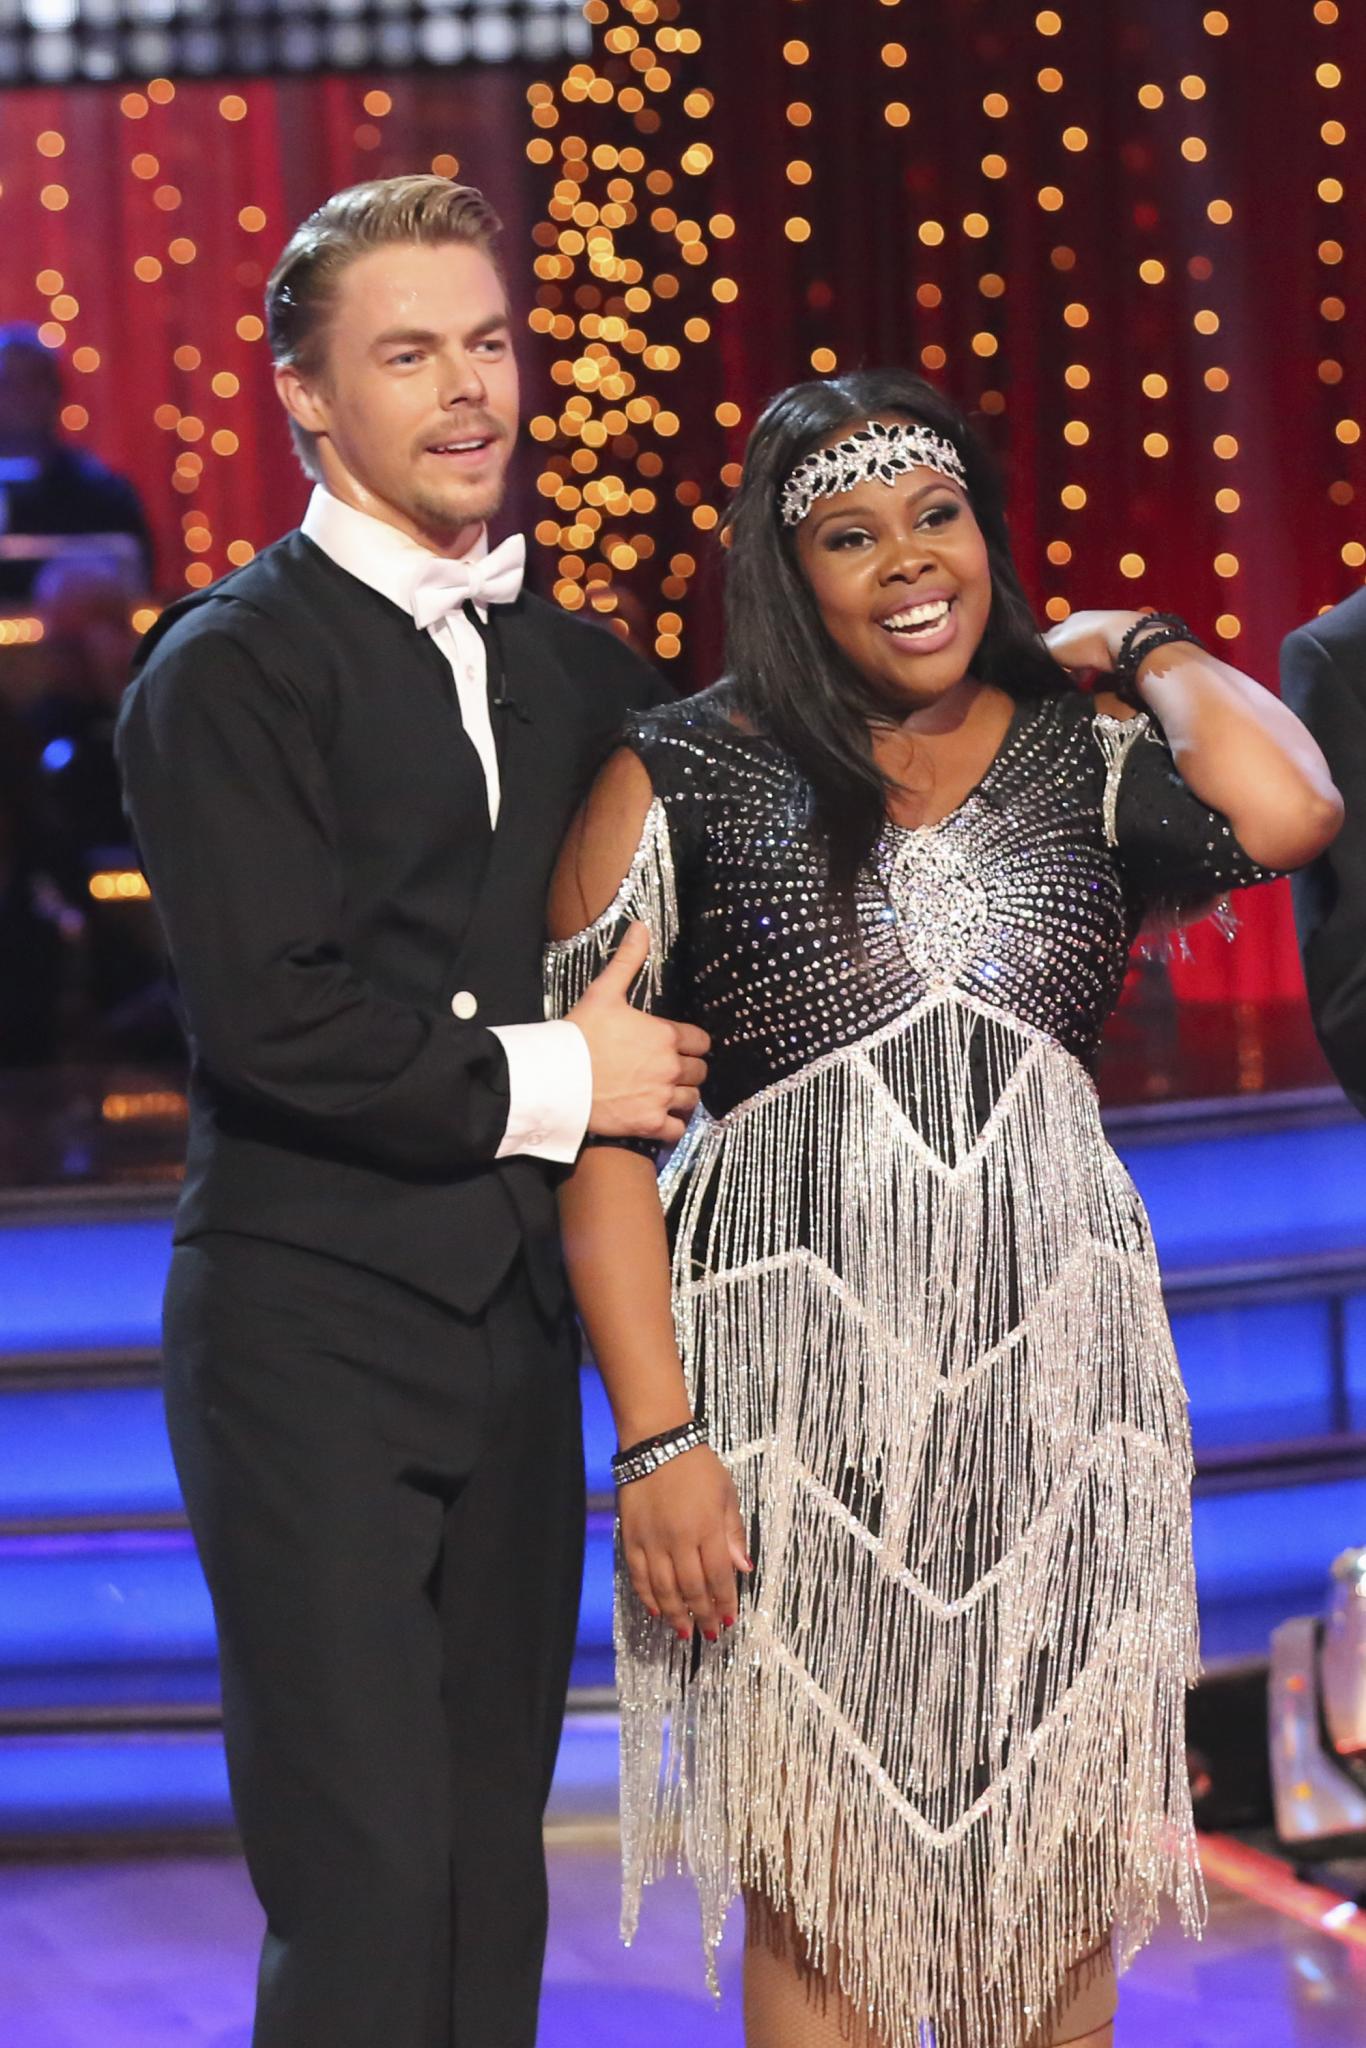 Amber Riley Wins ‘Dancing with the Stars’